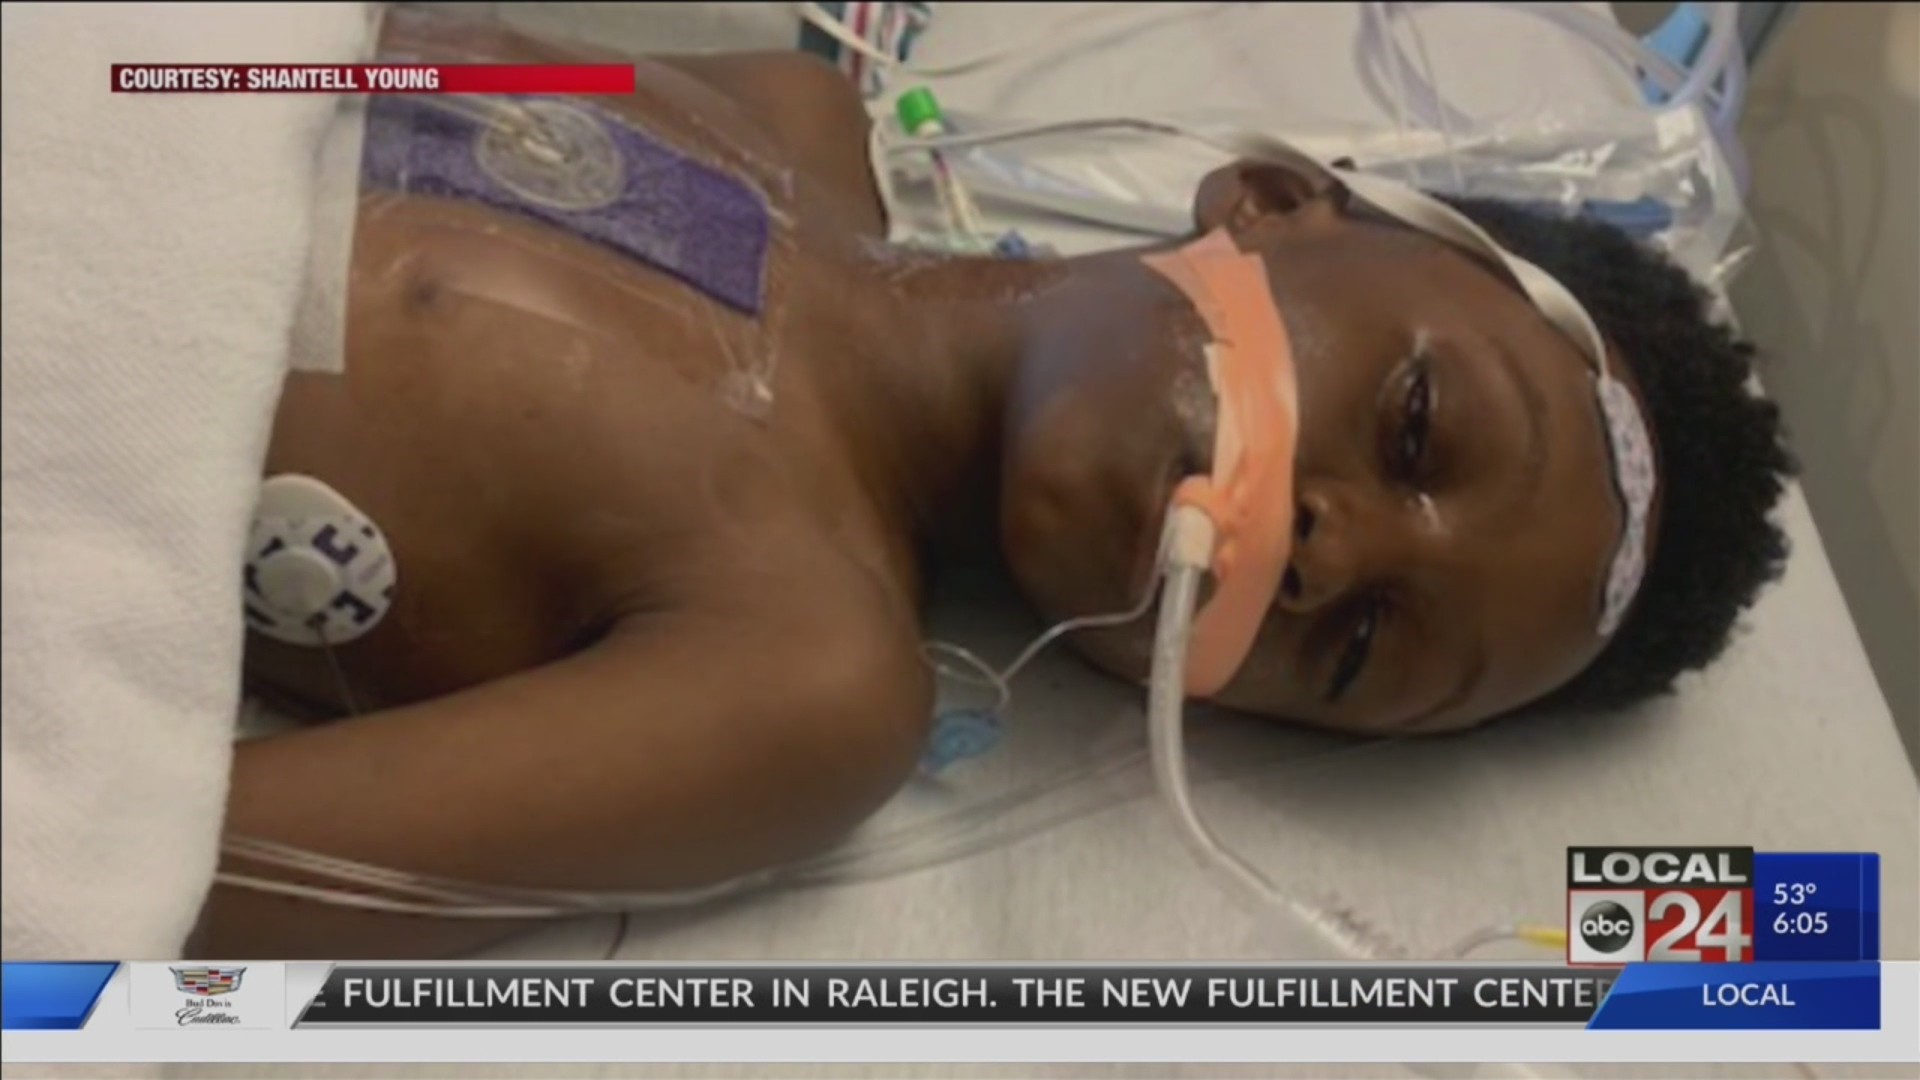 An in-school physical saves the life of an 8-year-old boy